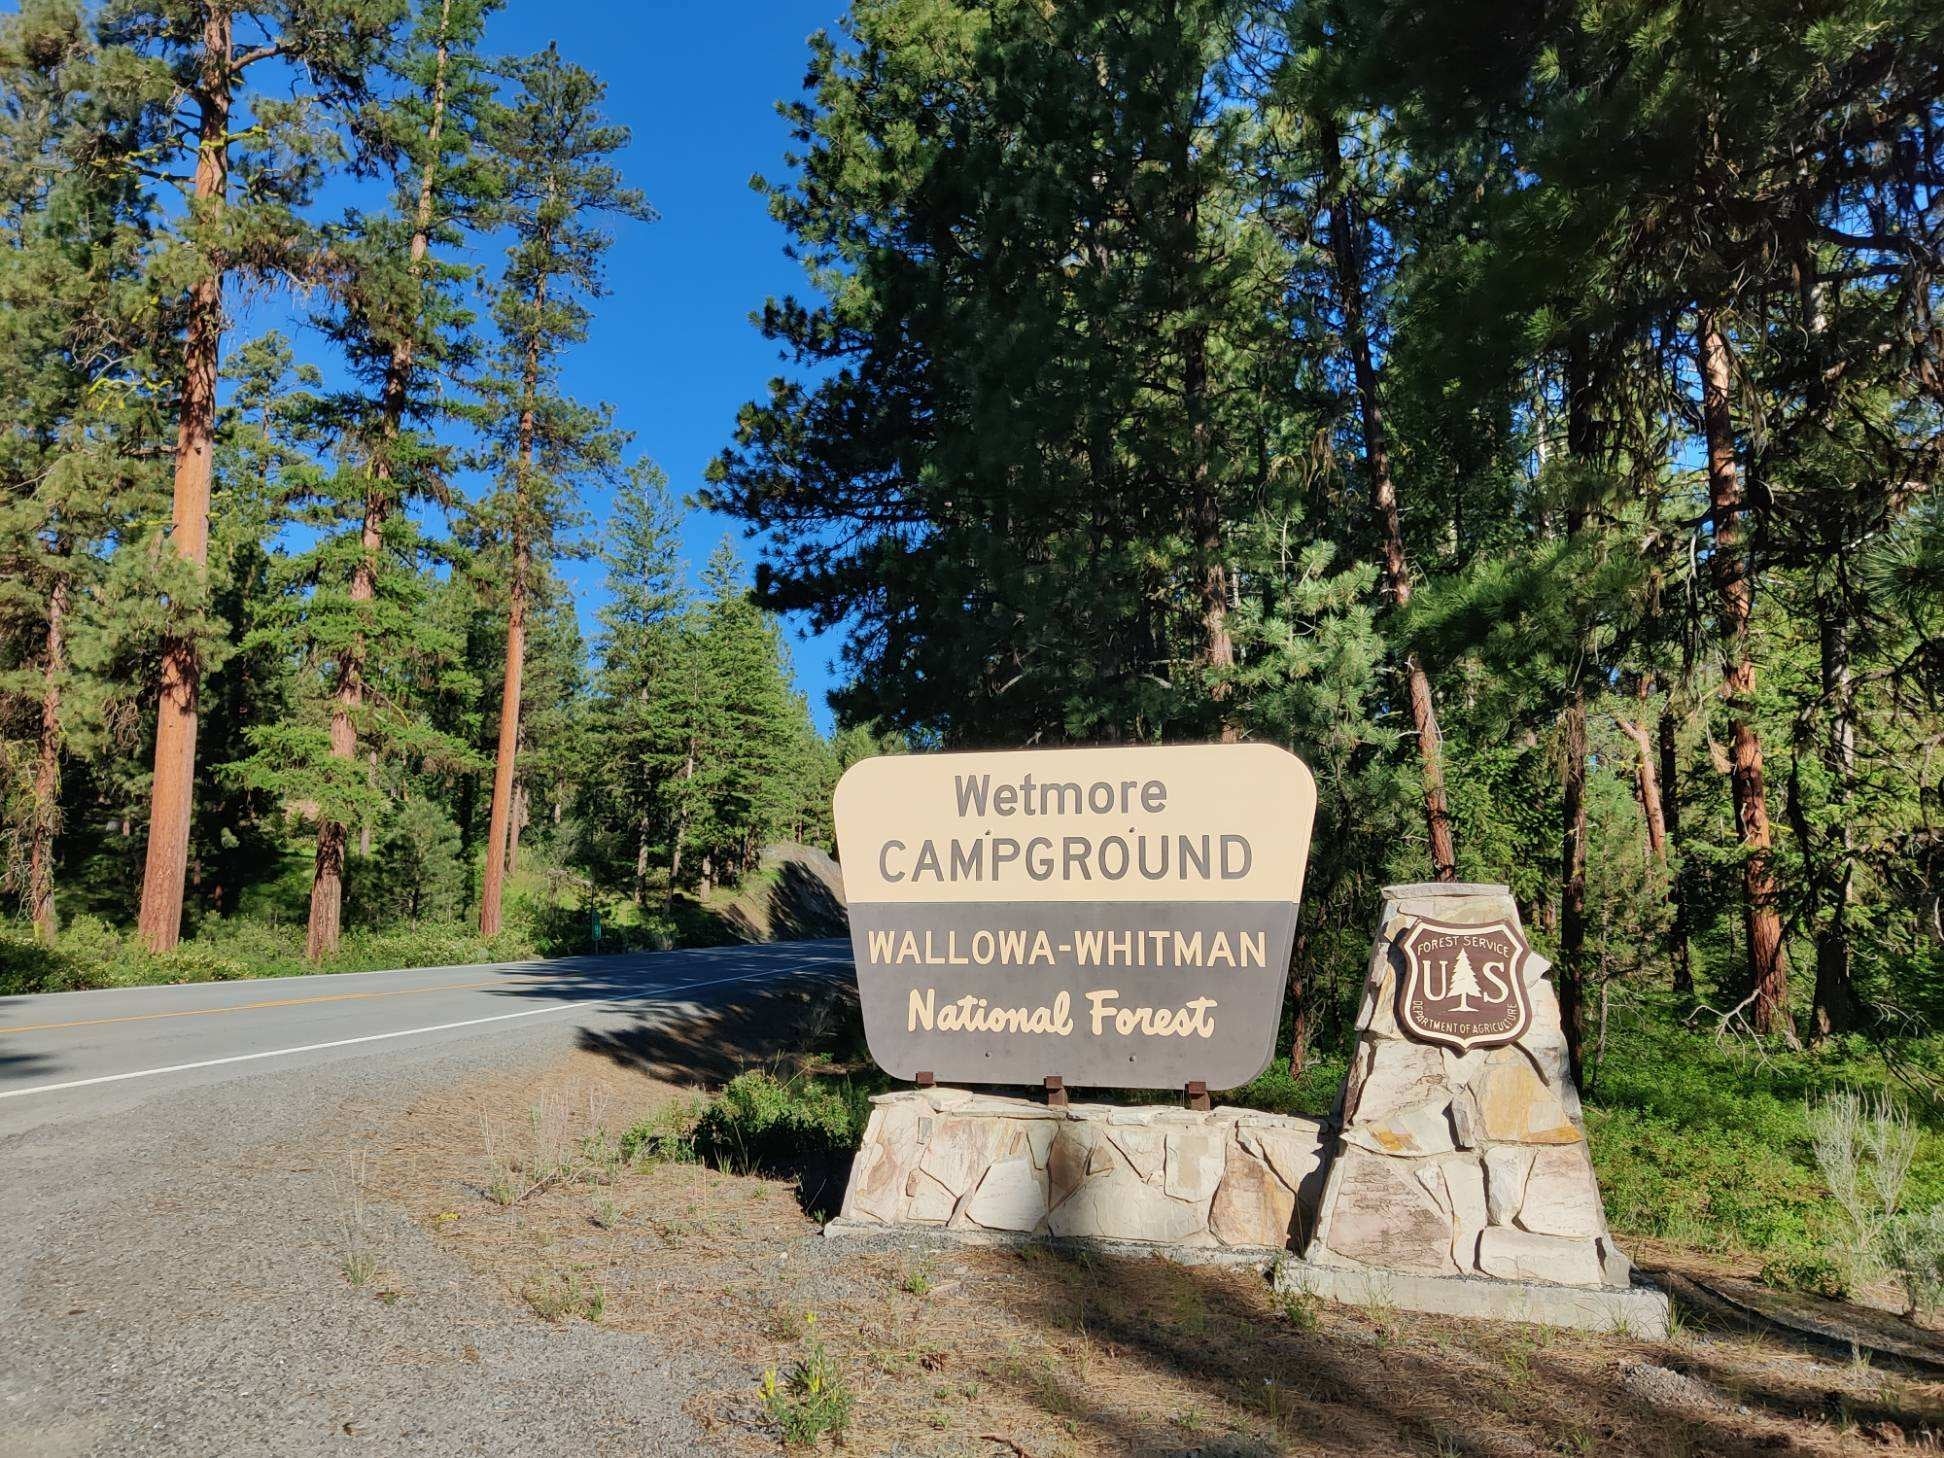 Camper submitted image from Wetmore Campground - 3